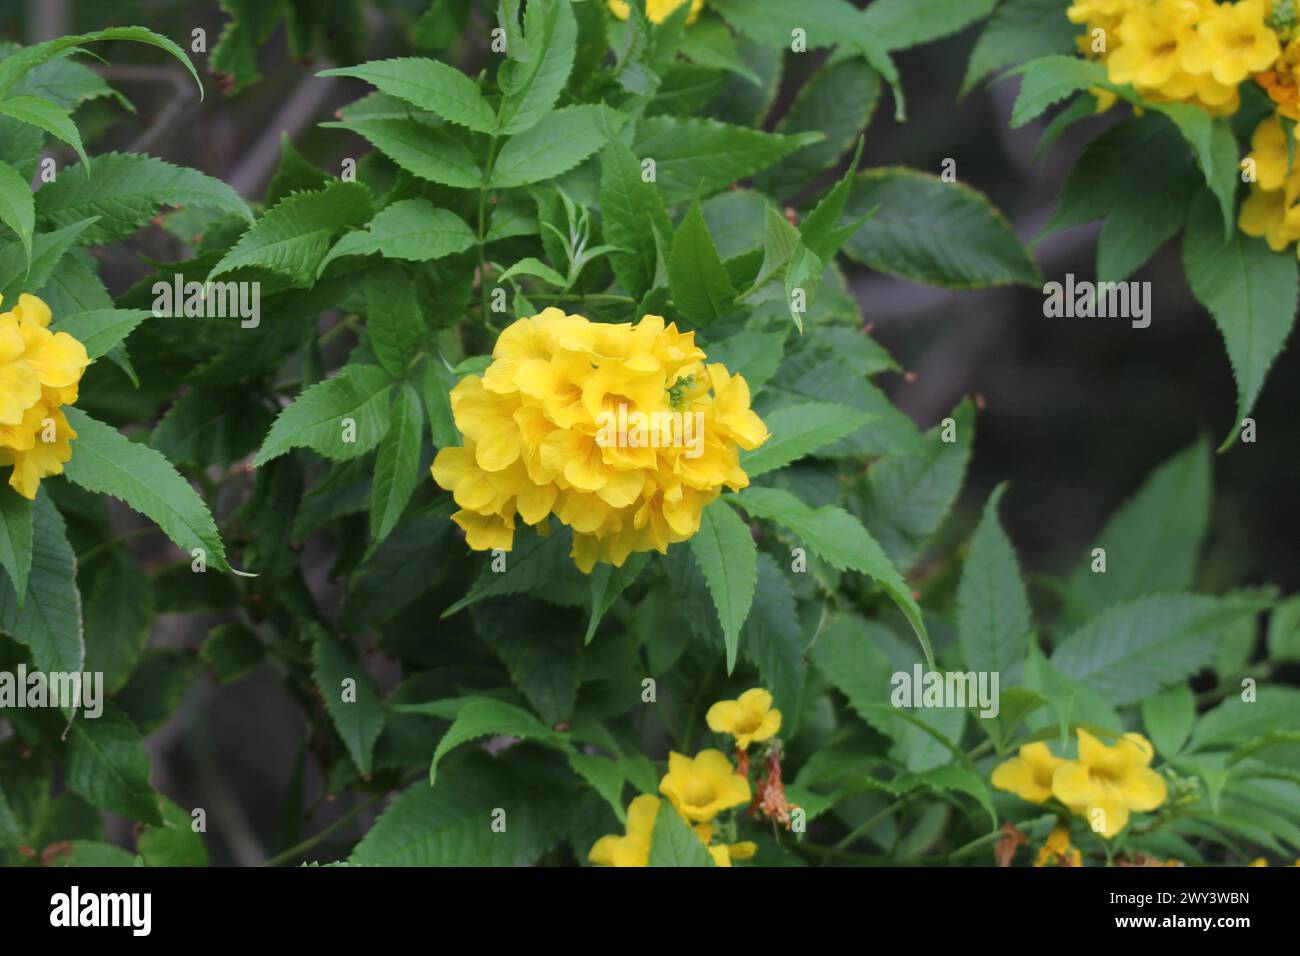 Yellow bells flowers on a tecoma stans plant in a garden Stock Photo